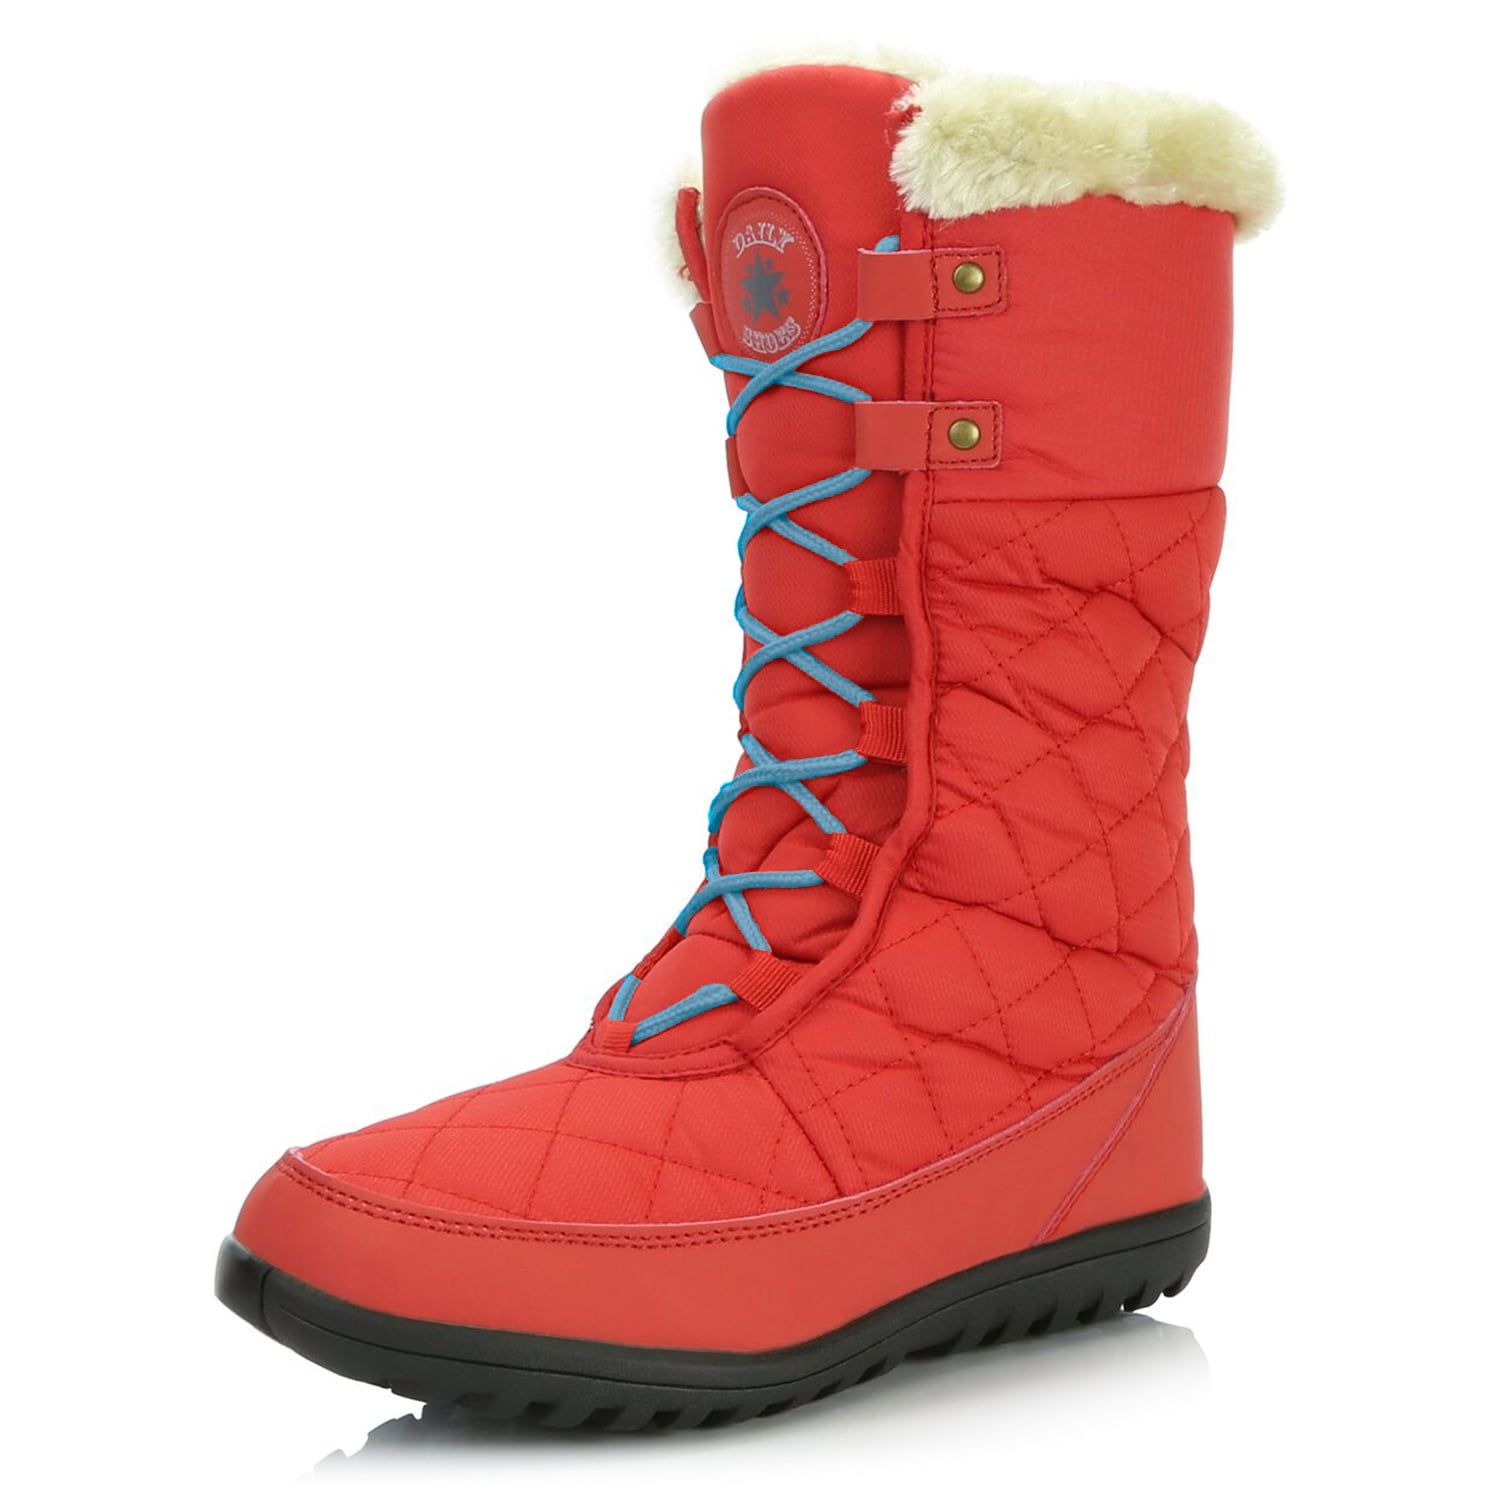 Winter Snow Boots for Women Round Toe Thicken Faux Fur Lined Flat Boots Warm Plush Cross Strap Mid Calf Boot